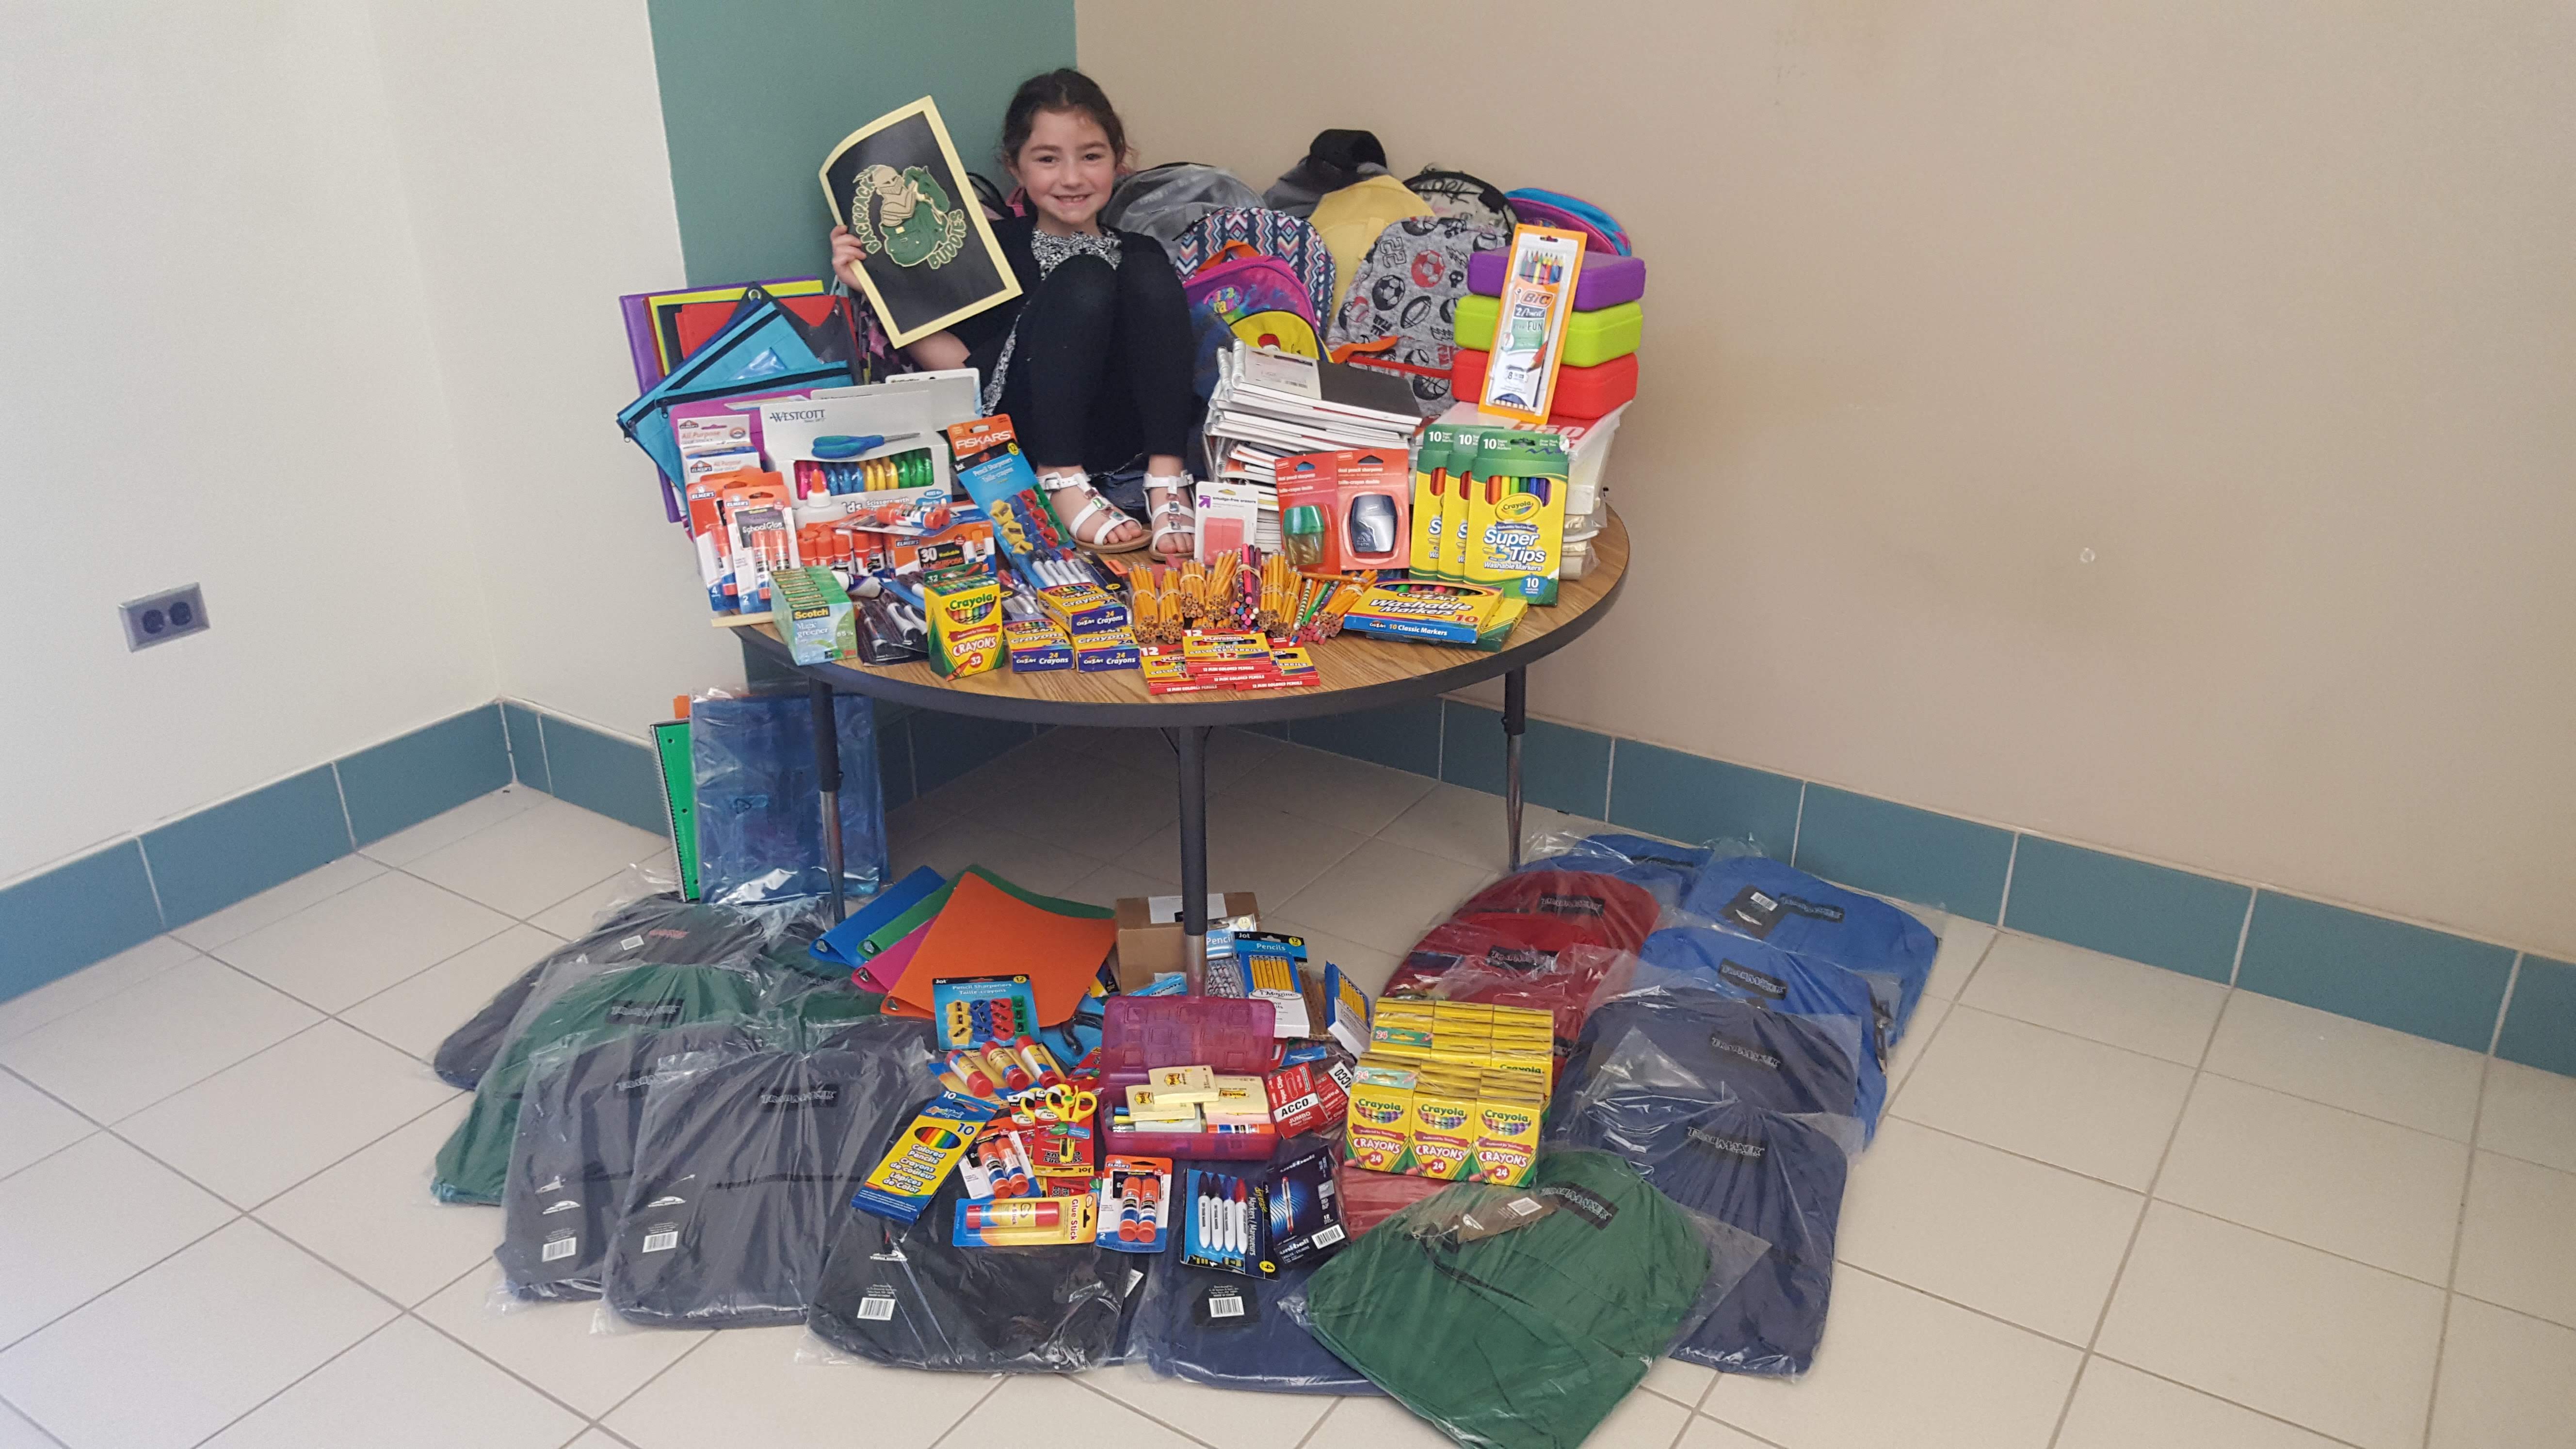 rylee surrounded by donated school supplies